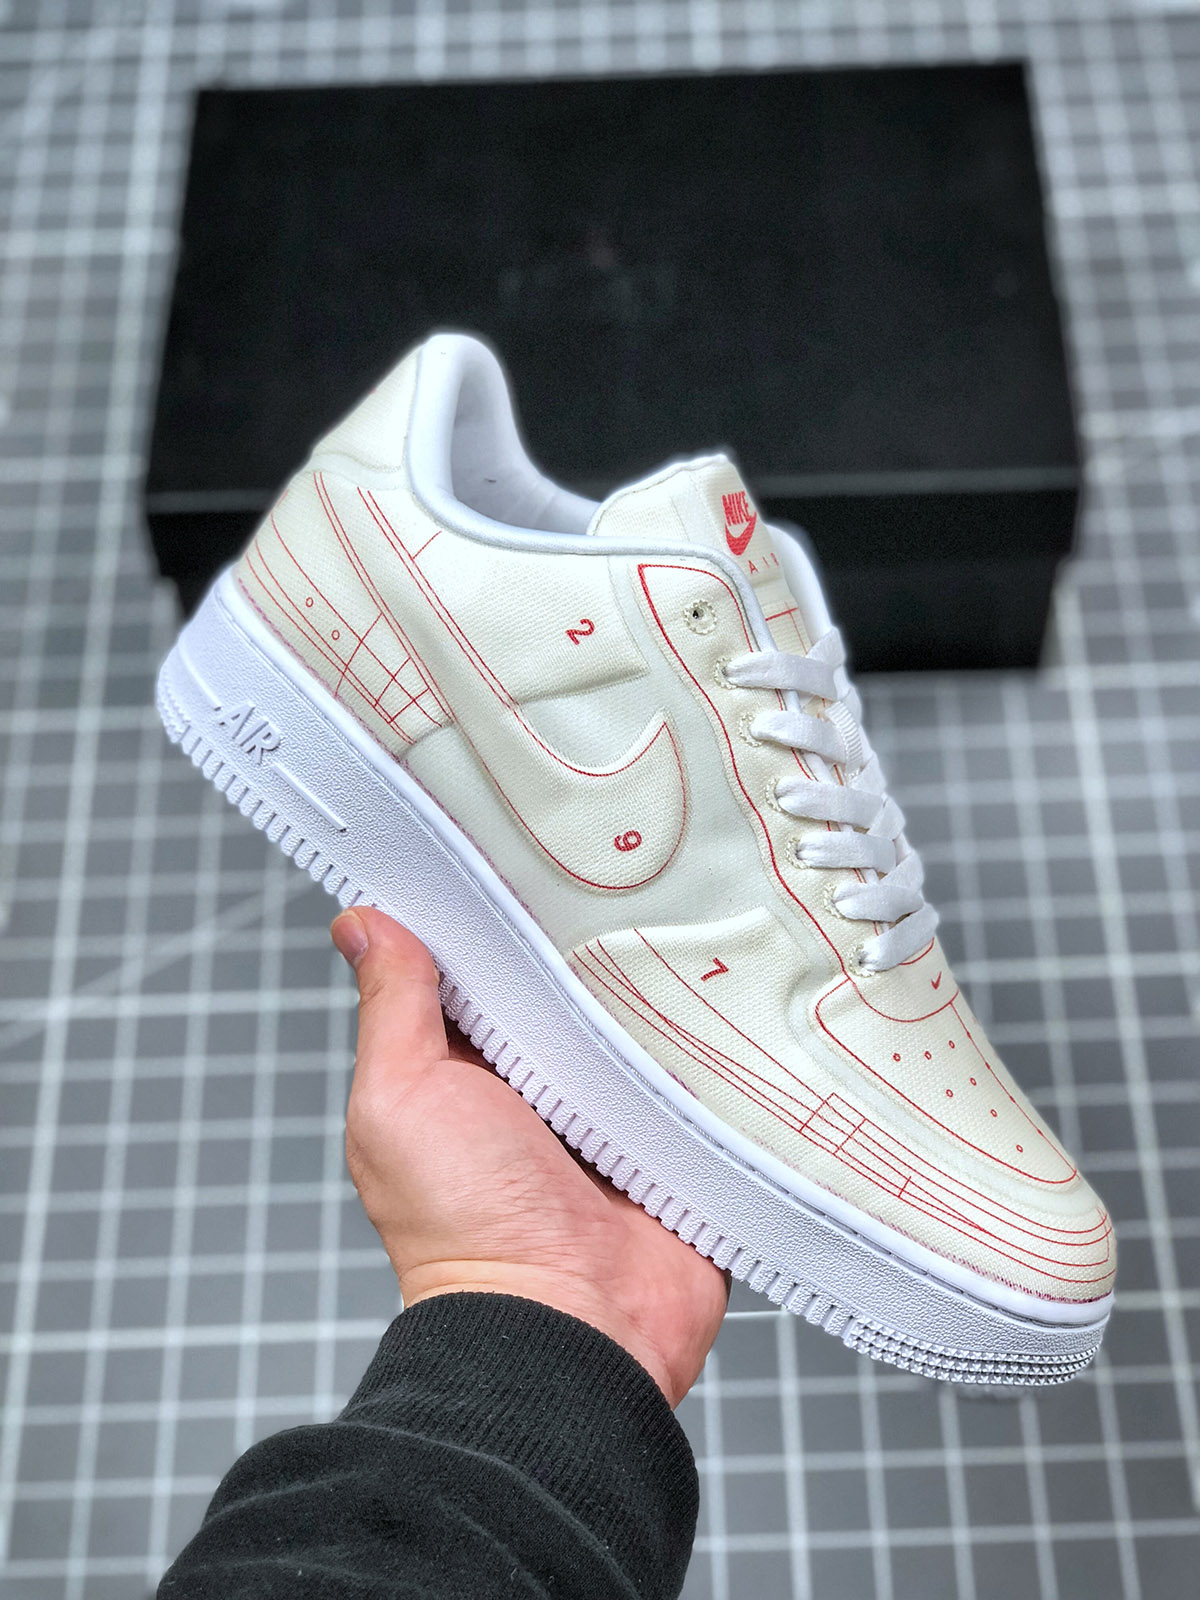 Nike Air Force 1 Low Summit White/University Red For Sale – Sneaker Hello